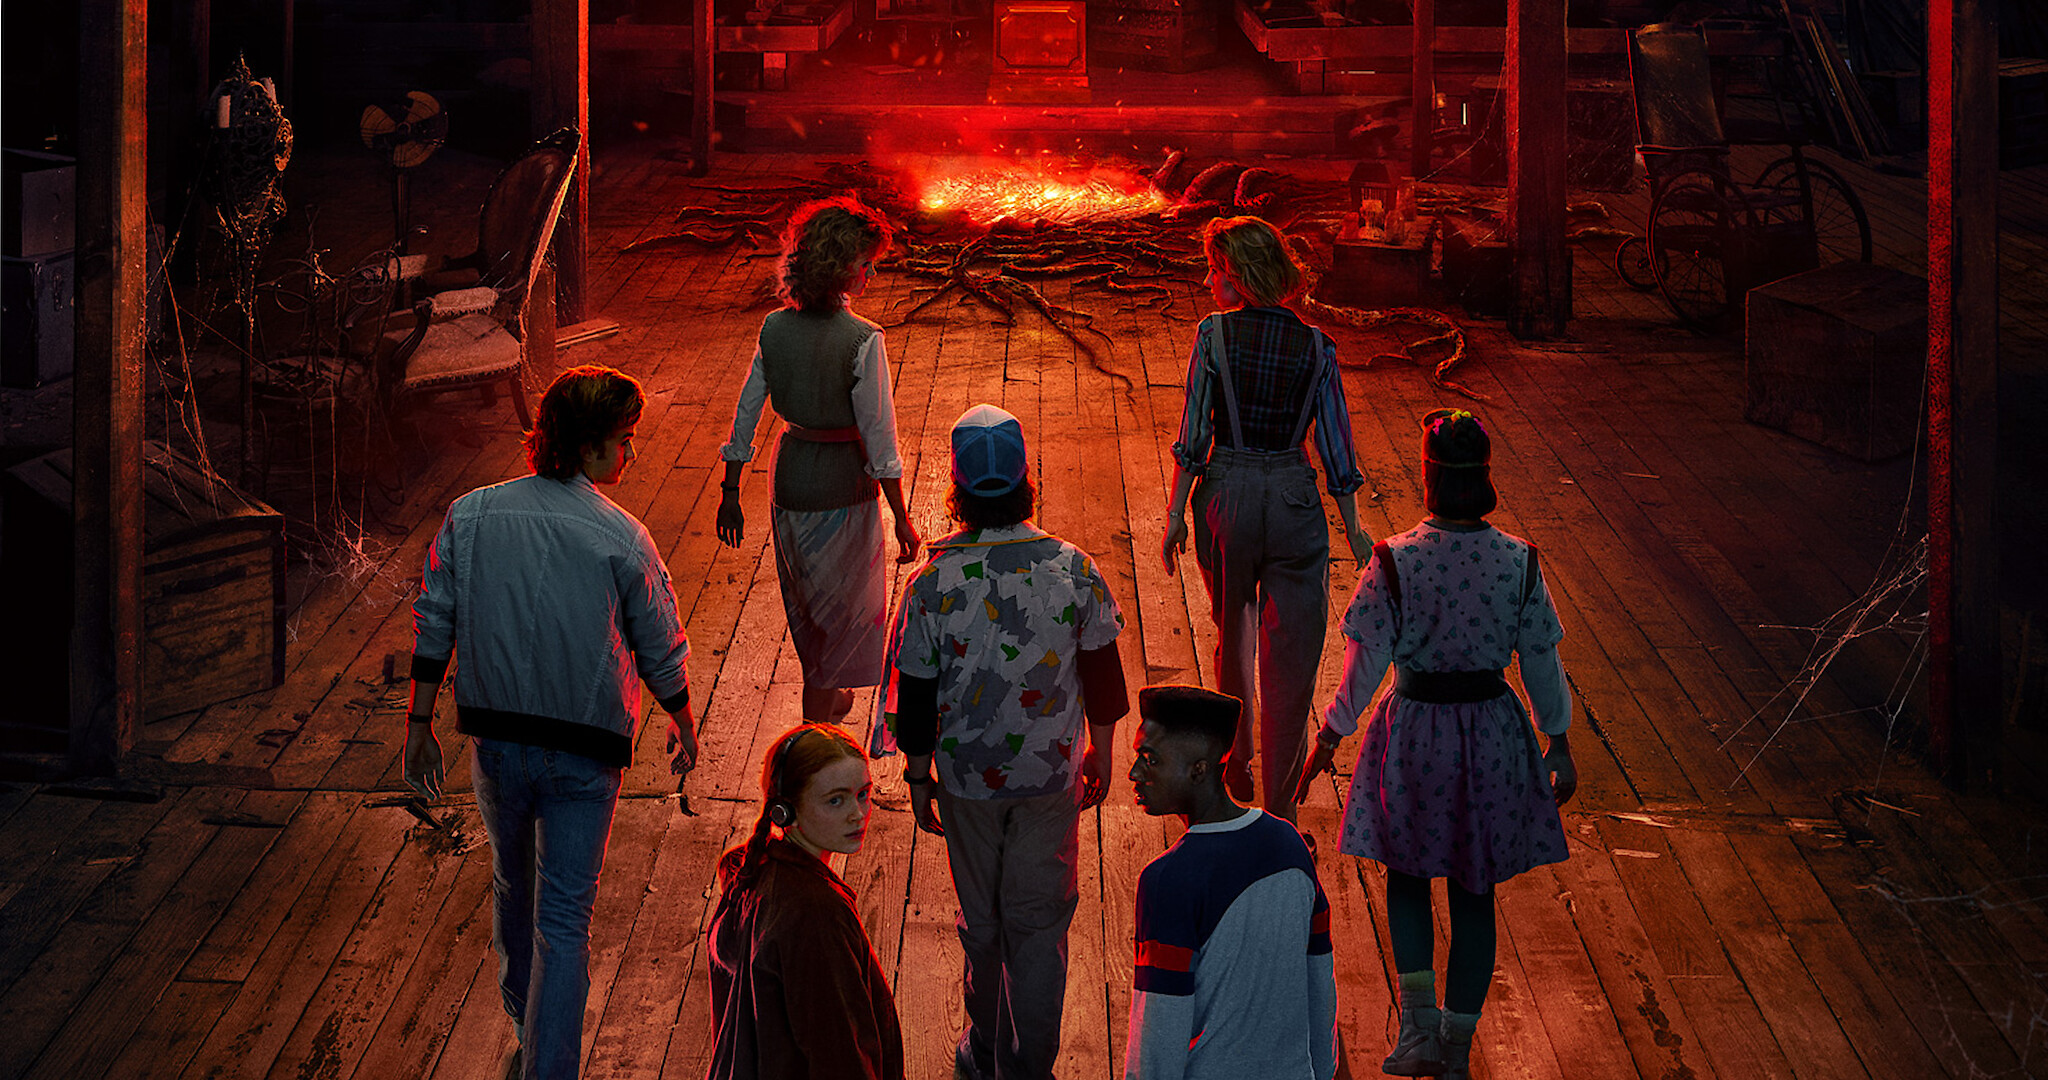 New 'Stranger Things' Trailer Hints at Death for 6 Characters